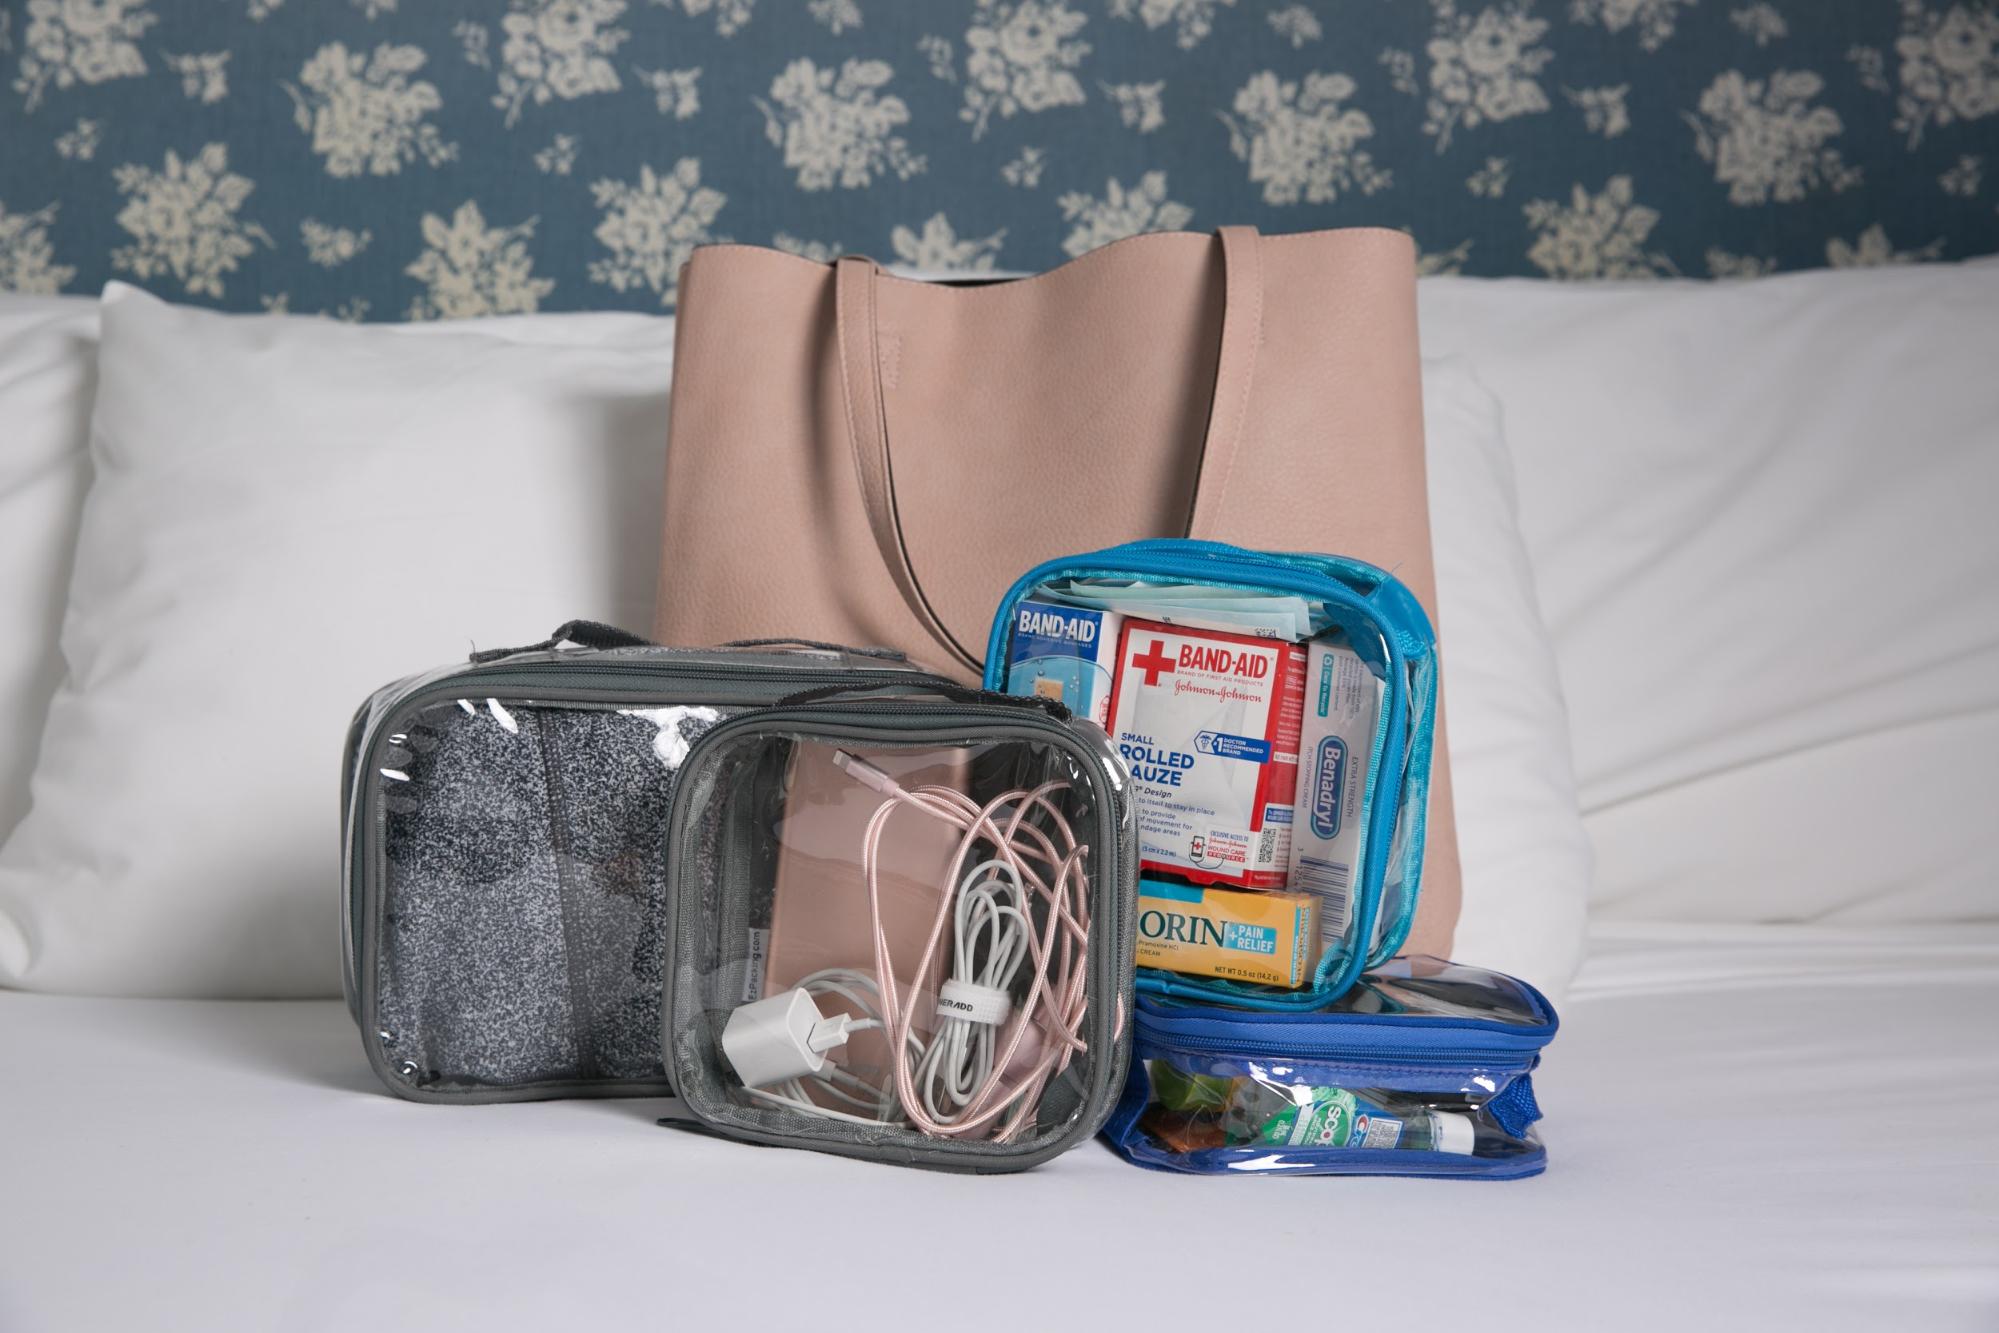 Place all your in-flight essentials inside clear packing cubes 